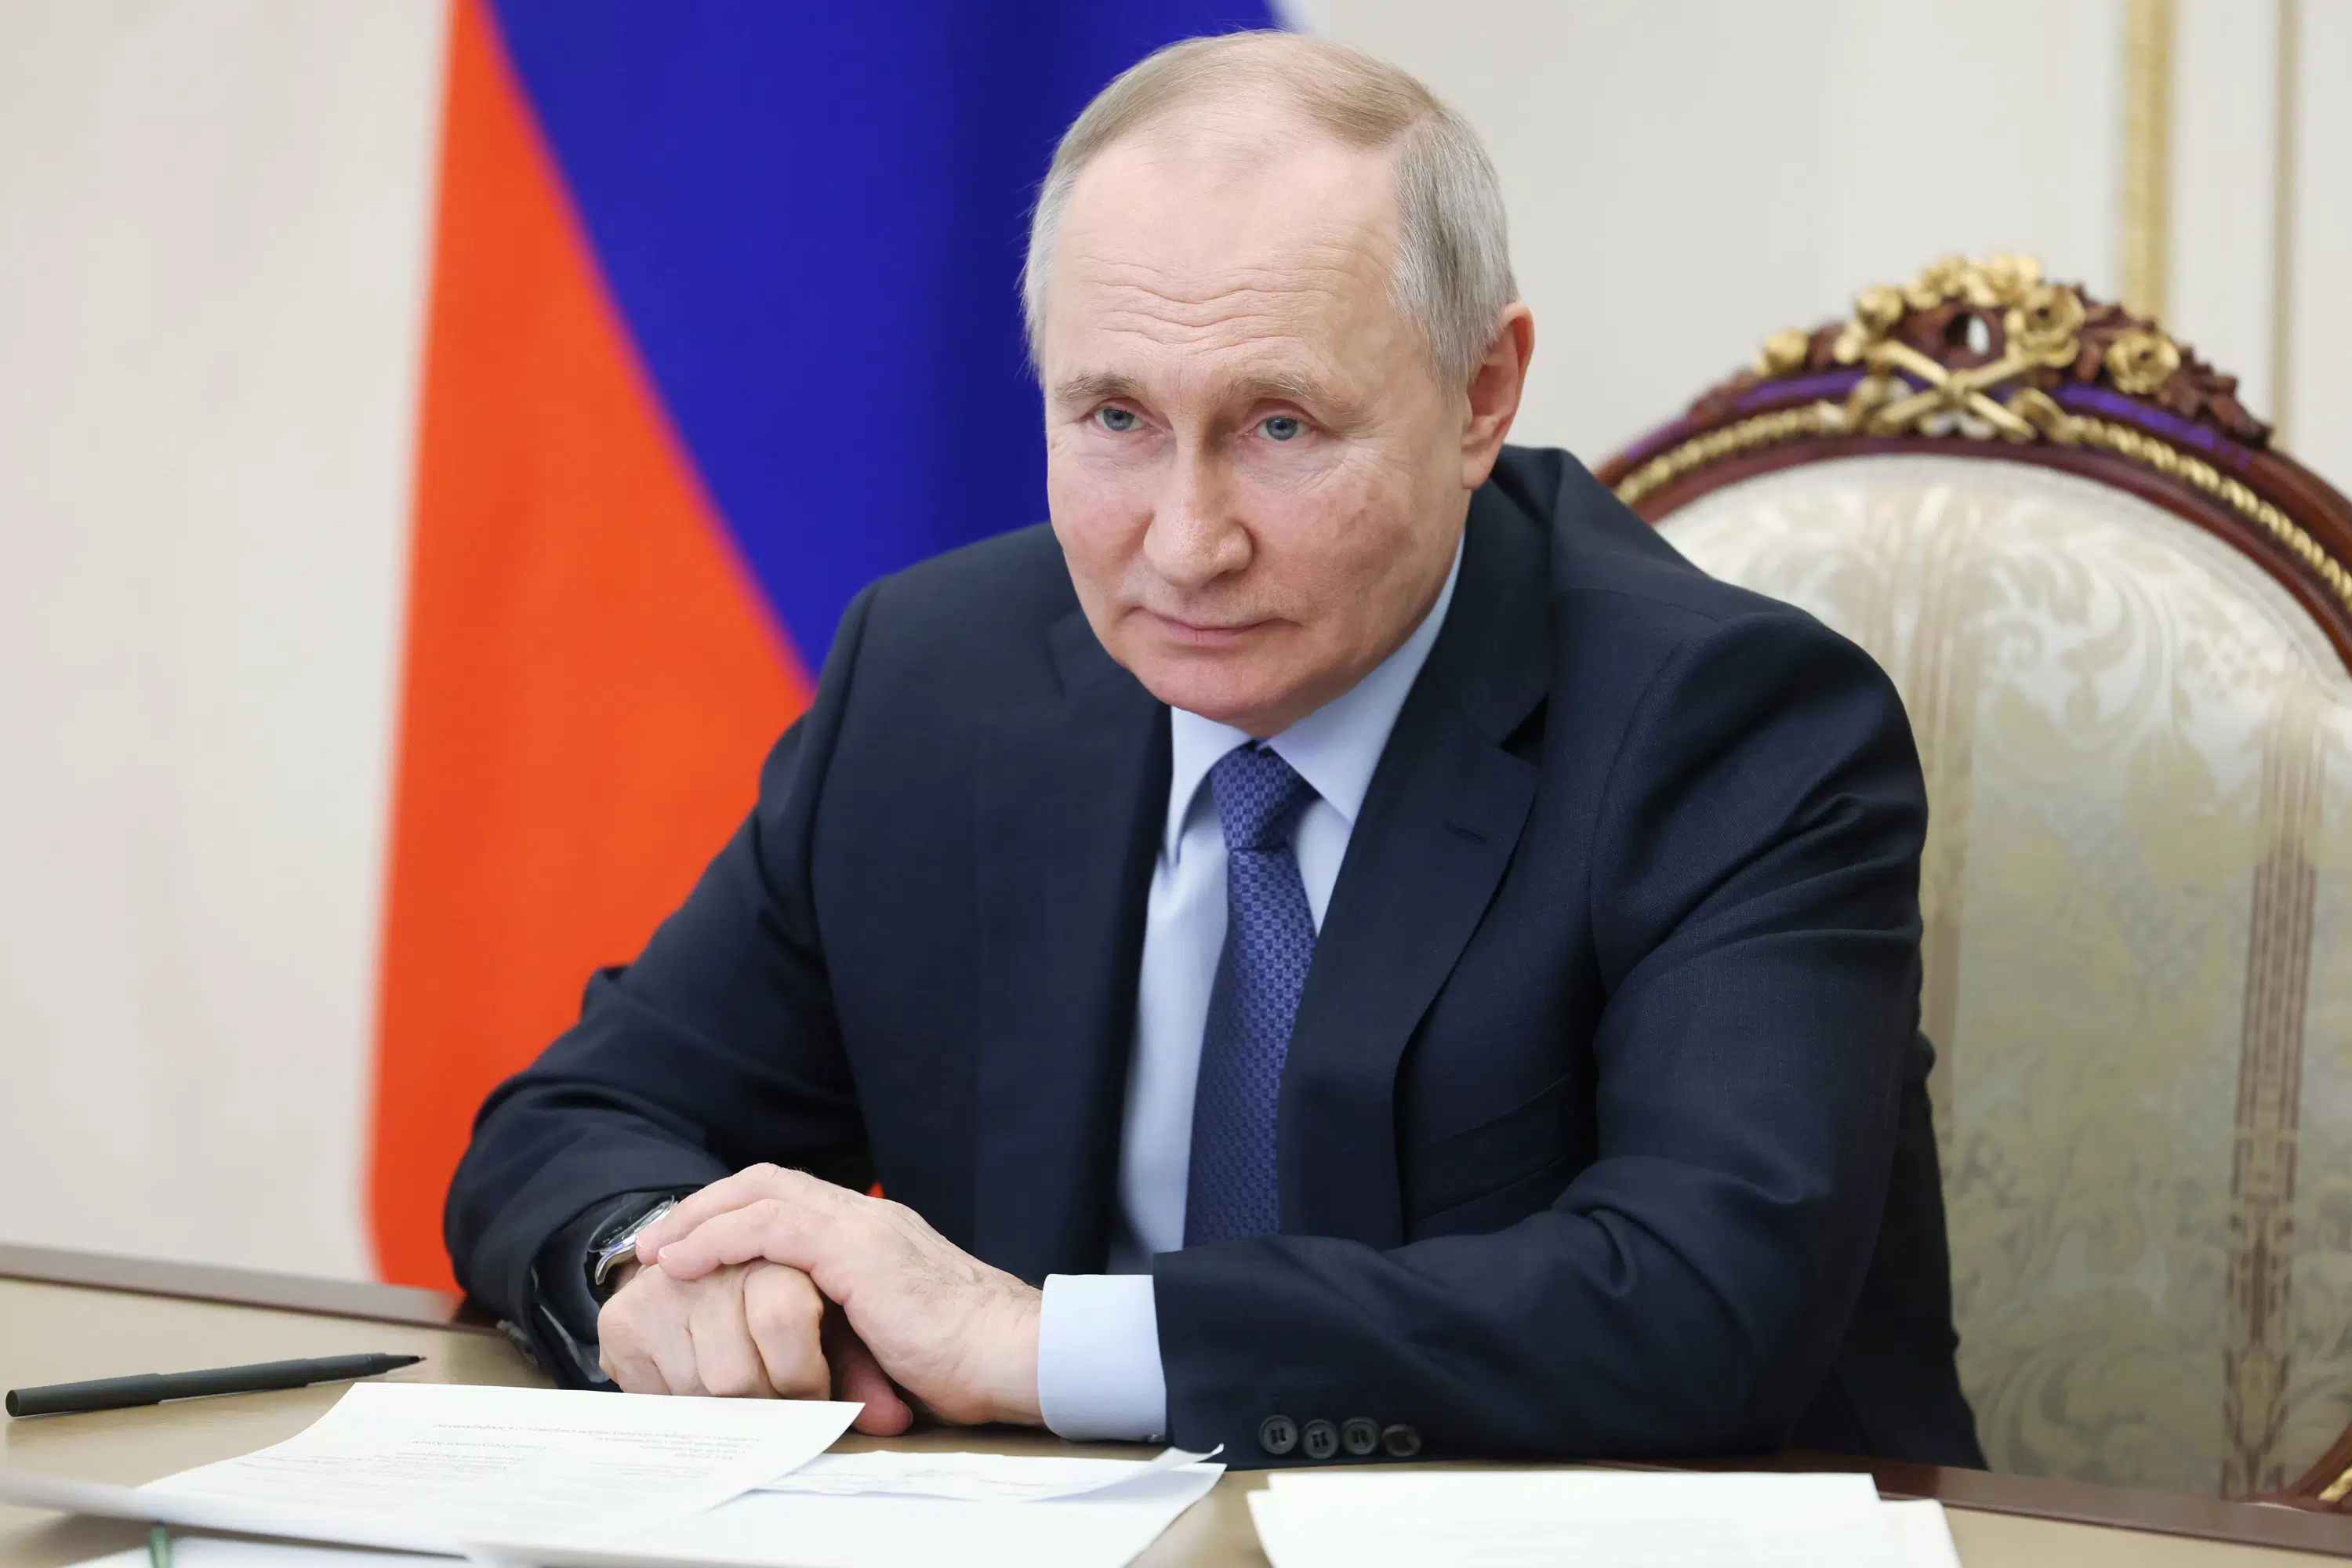 THE HAGUE (AP) — The International Criminal Court said on Friday it issued an arrest warrant for Russian President Vladimir Putin for war crimes bec